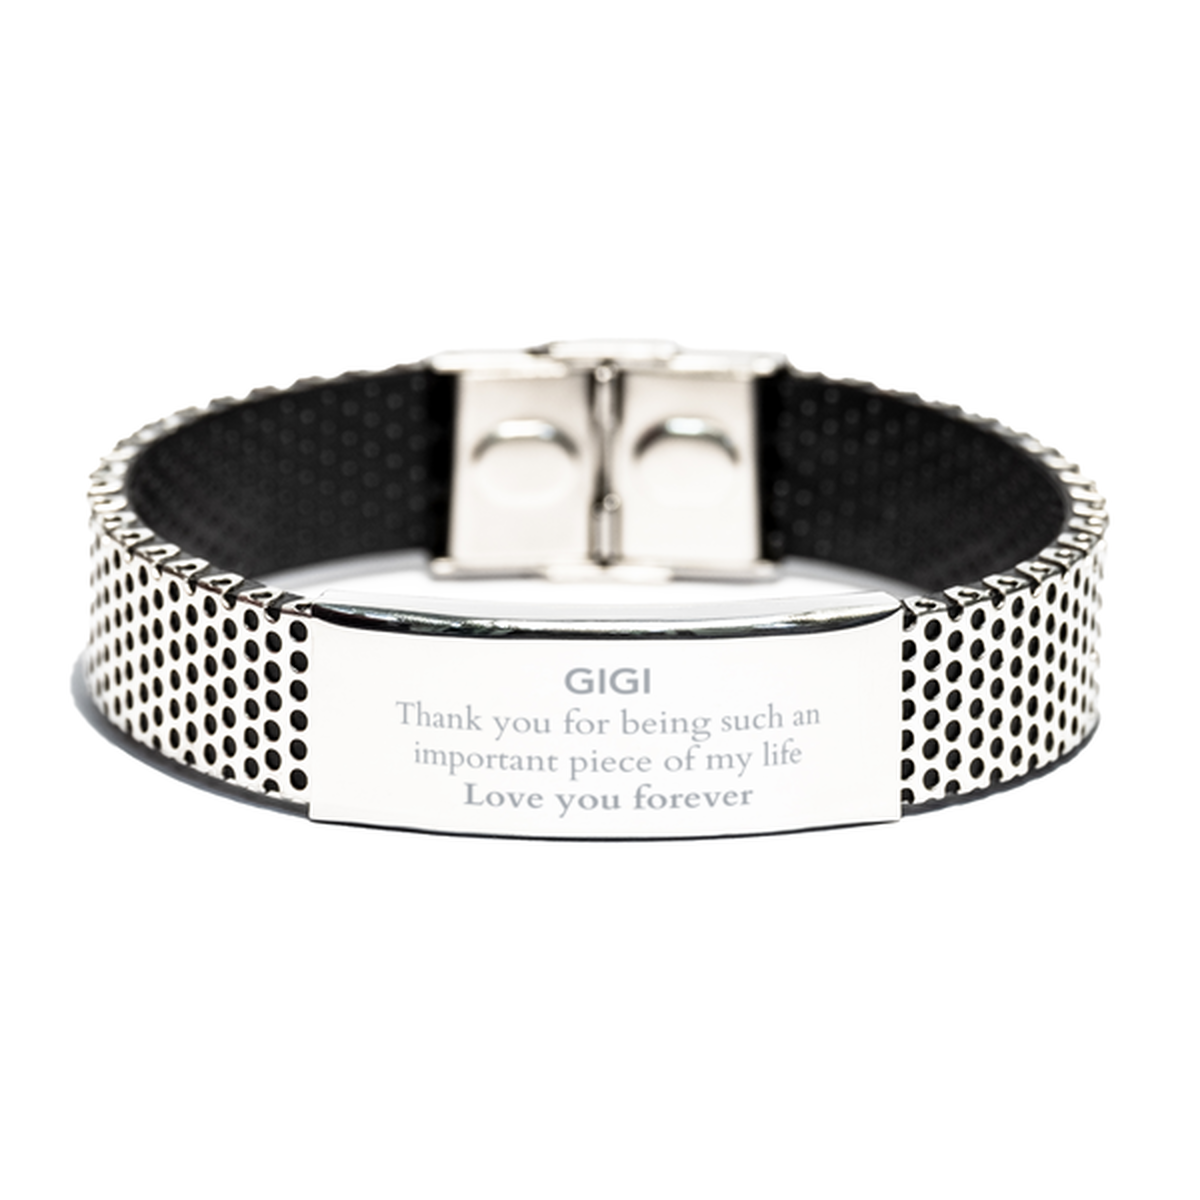 Appropriate Gigi Stainless Steel Bracelet Epic Birthday Gifts for Gigi Thank you for being such an important piece of my life Gigi Christmas Mothers Fathers Day